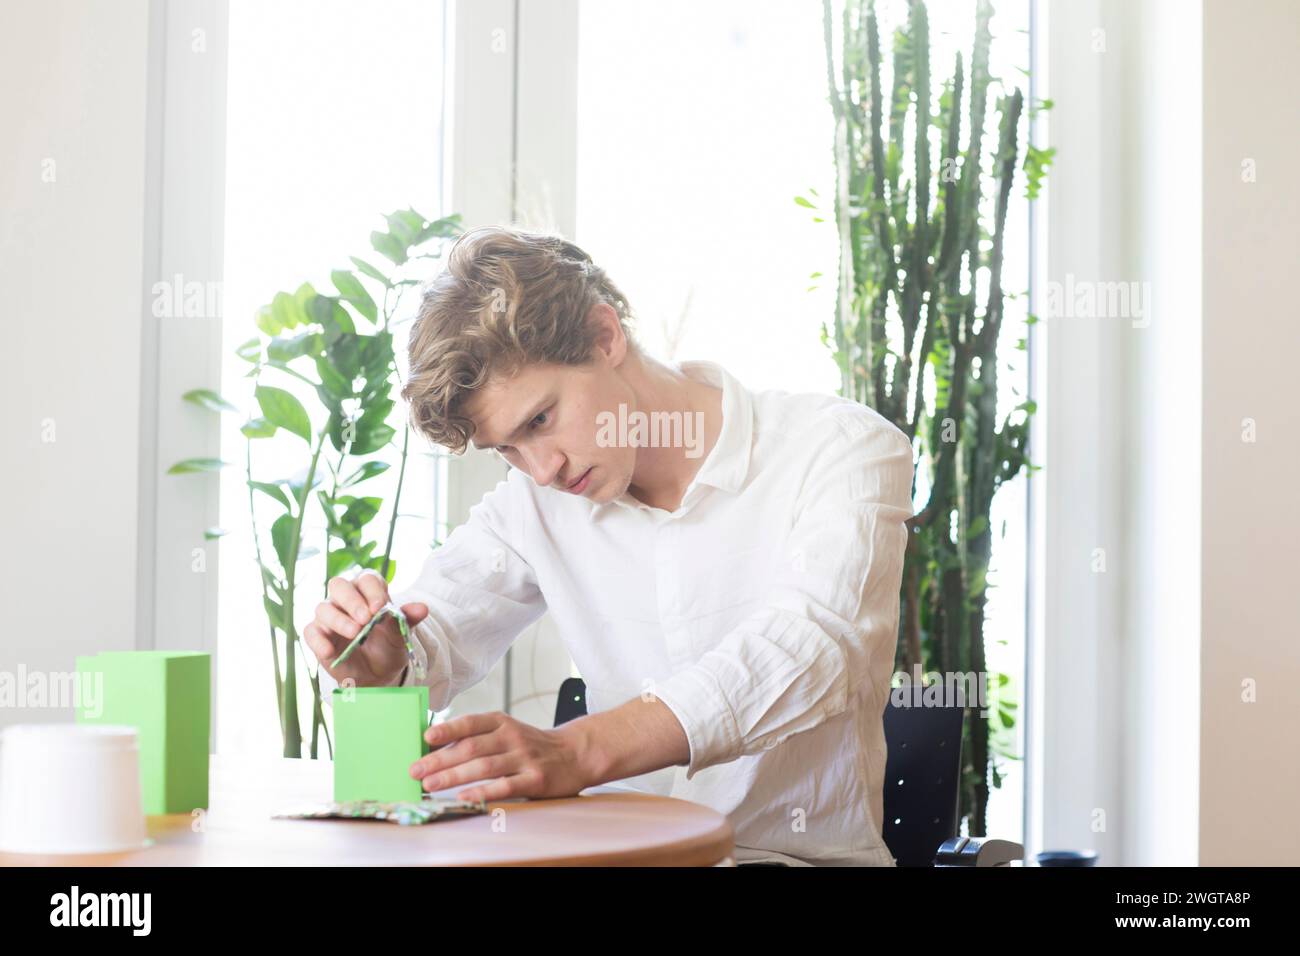 Young man building a green energy house model Stock Photo